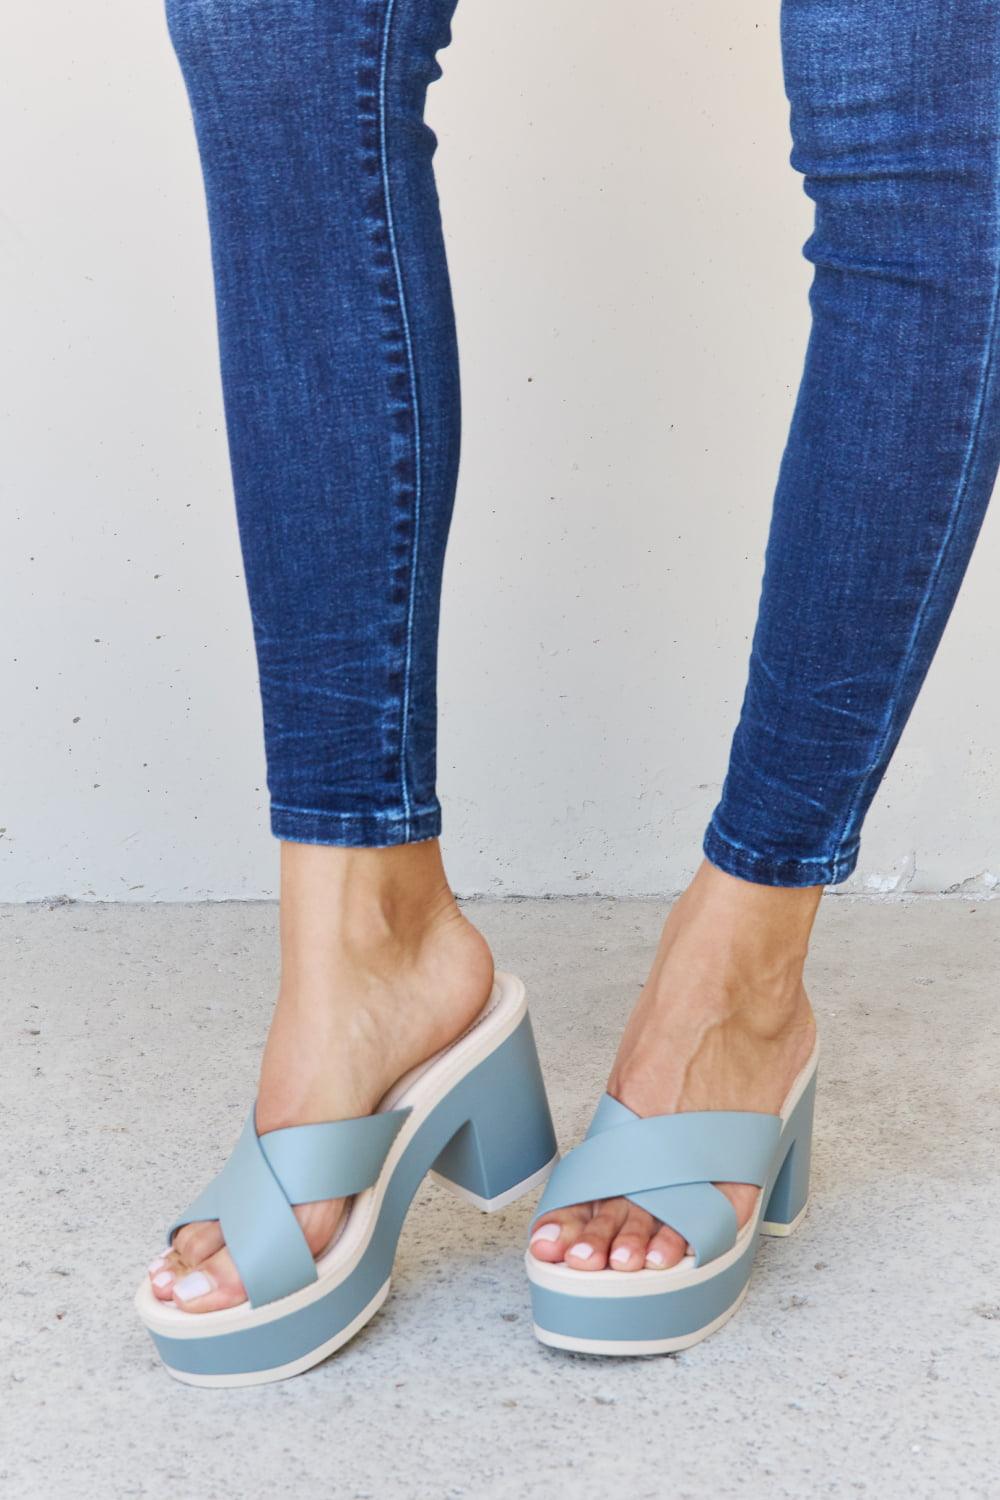 Weeboo Cherish The Moments Contrast Platform Sandals in Misty Blue - CADEAUME